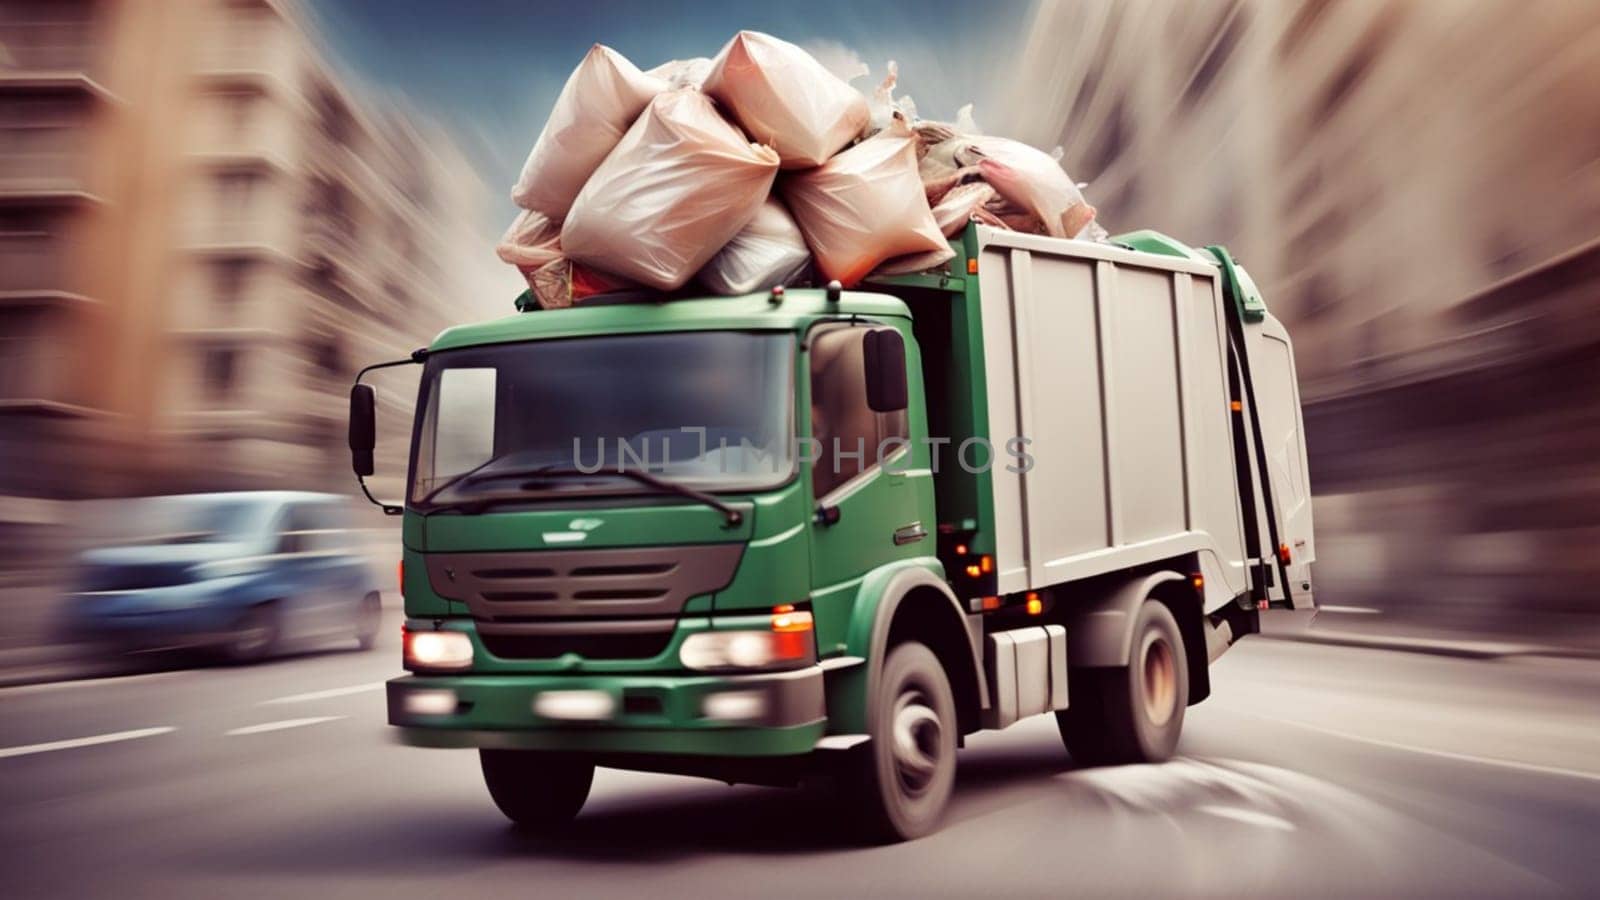 Garbage Truck full of trash, panning, motion blurred speeding city servicce waste management service by verbano